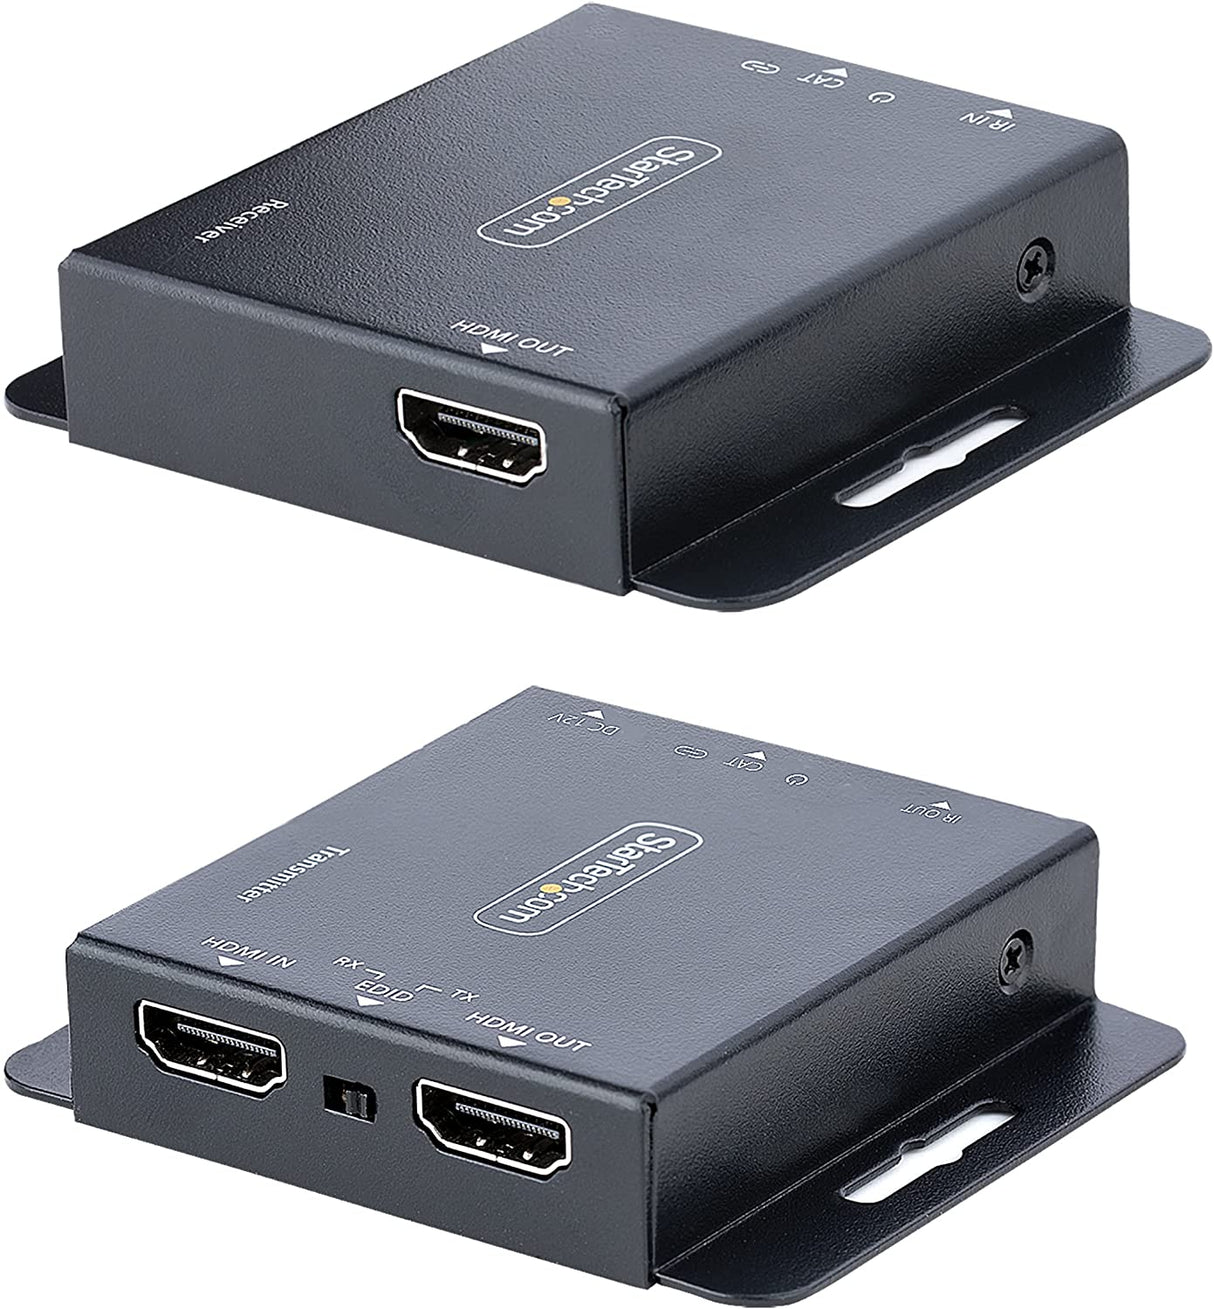 StarTech.com HDMI Extender Over CAT6/CAT5, 4K30Hz/130ft or 1080p/230ft Video Extender, HDMI Over Ethernet Extender, PoC HDMI Transmitter and Receiver Kit, IR Ext. - Local Video (EXTEND-HDMI-4K40C6P1)